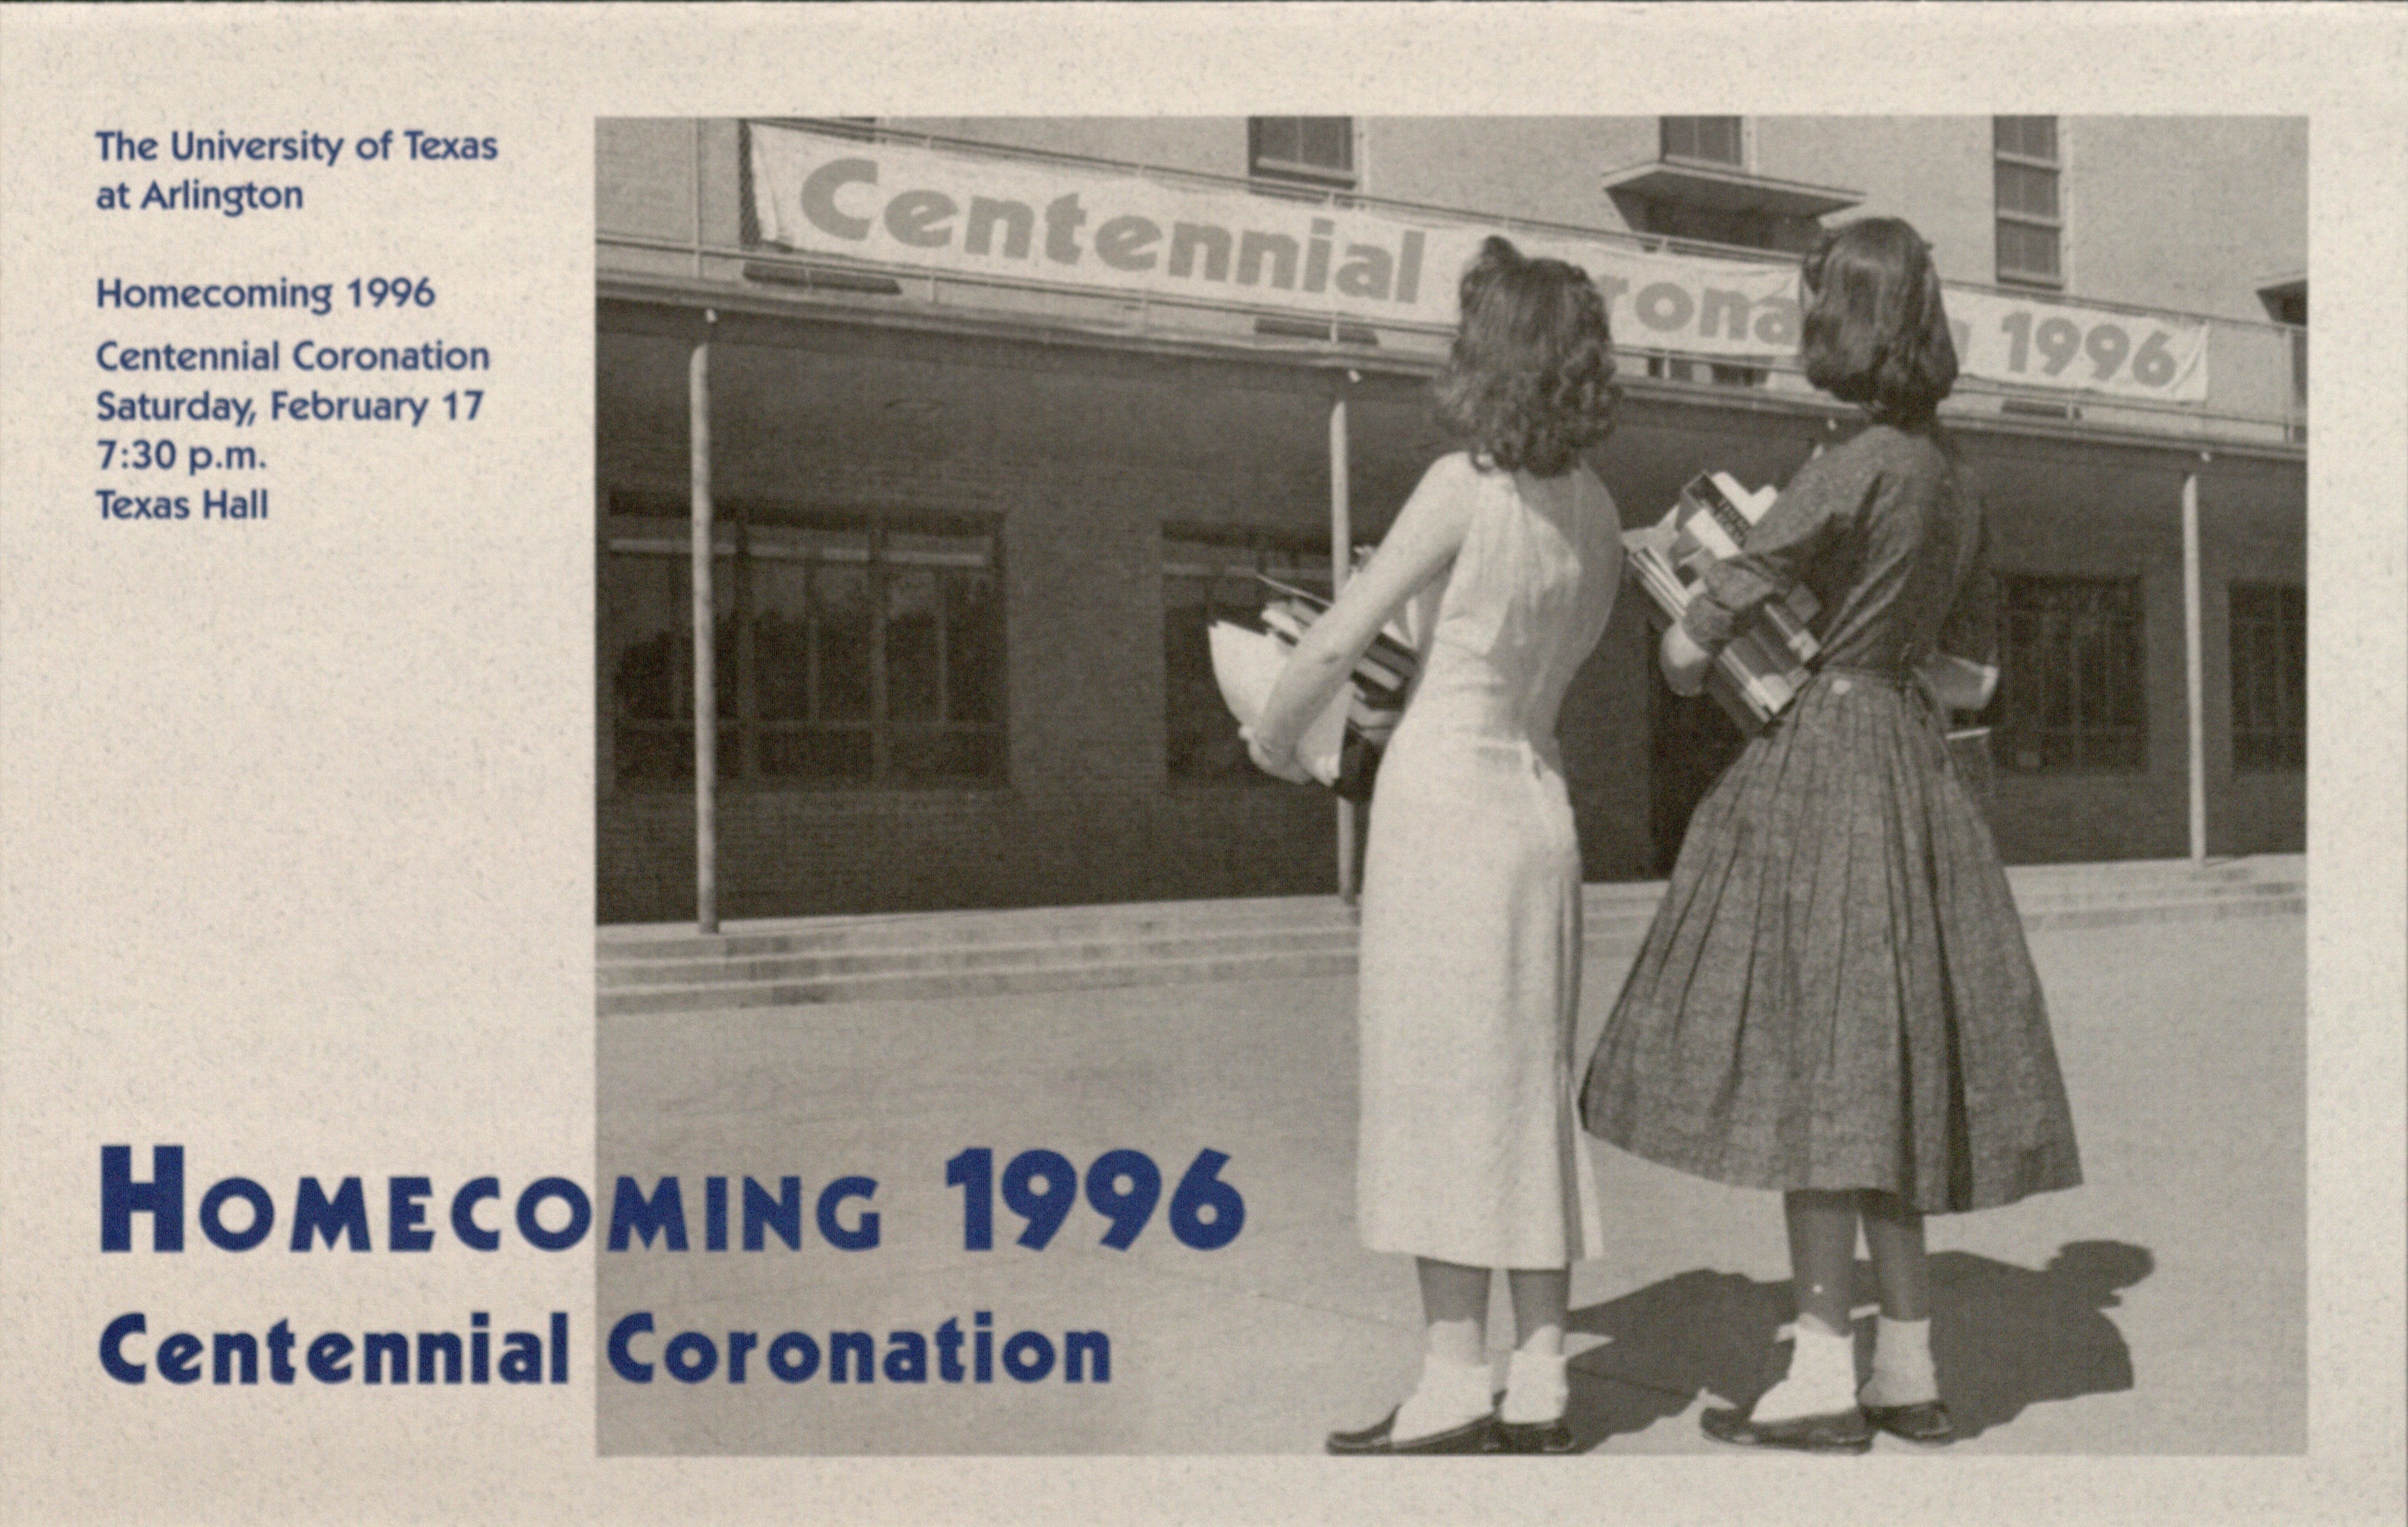 Homecoming flyer featuring two mid-20th century female students looking af a building.